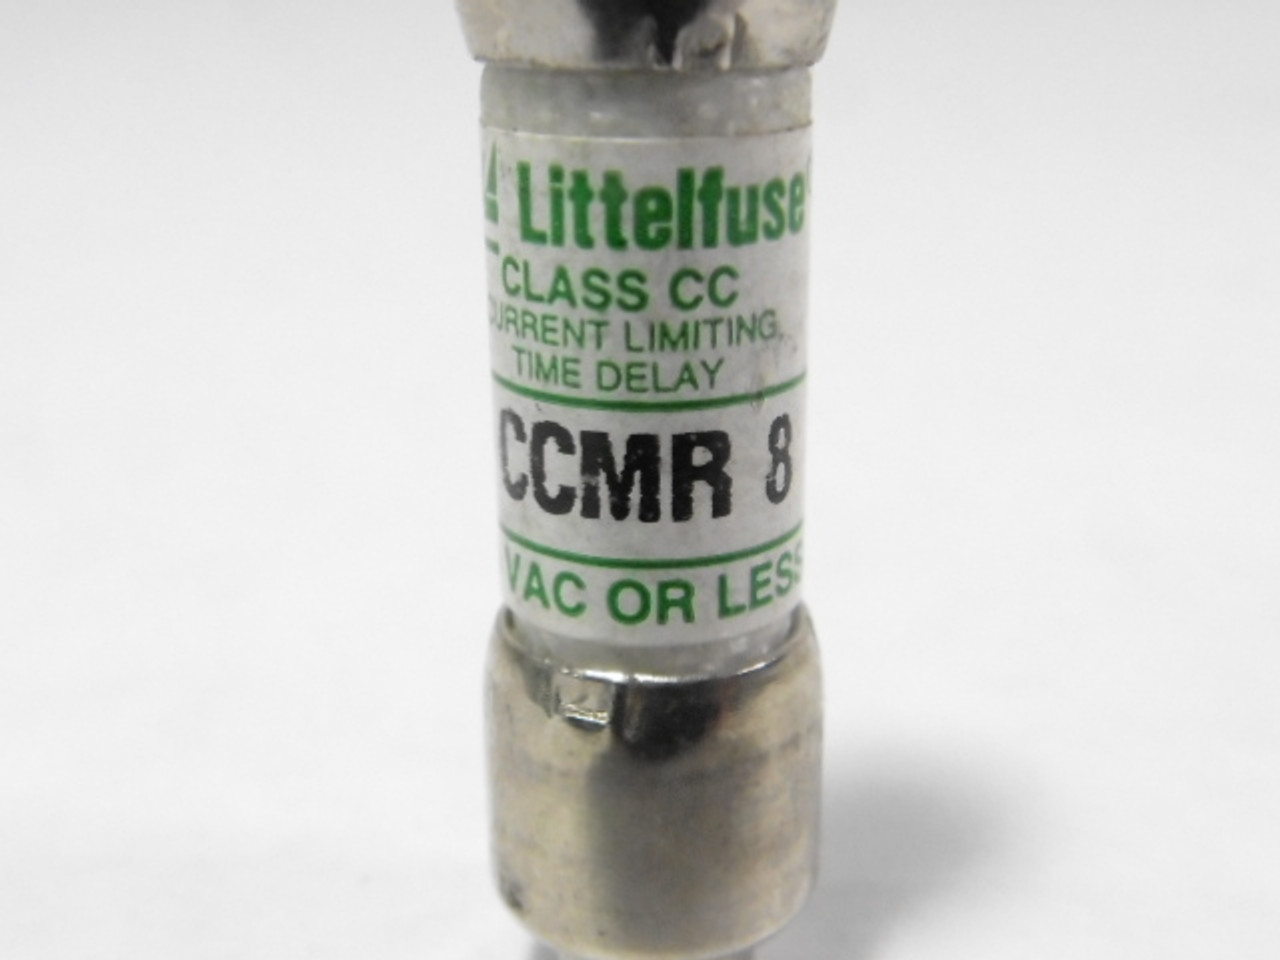 Littelfuse CCMR-8 Current Limiting Time Delay Fuse 8A 600V USED